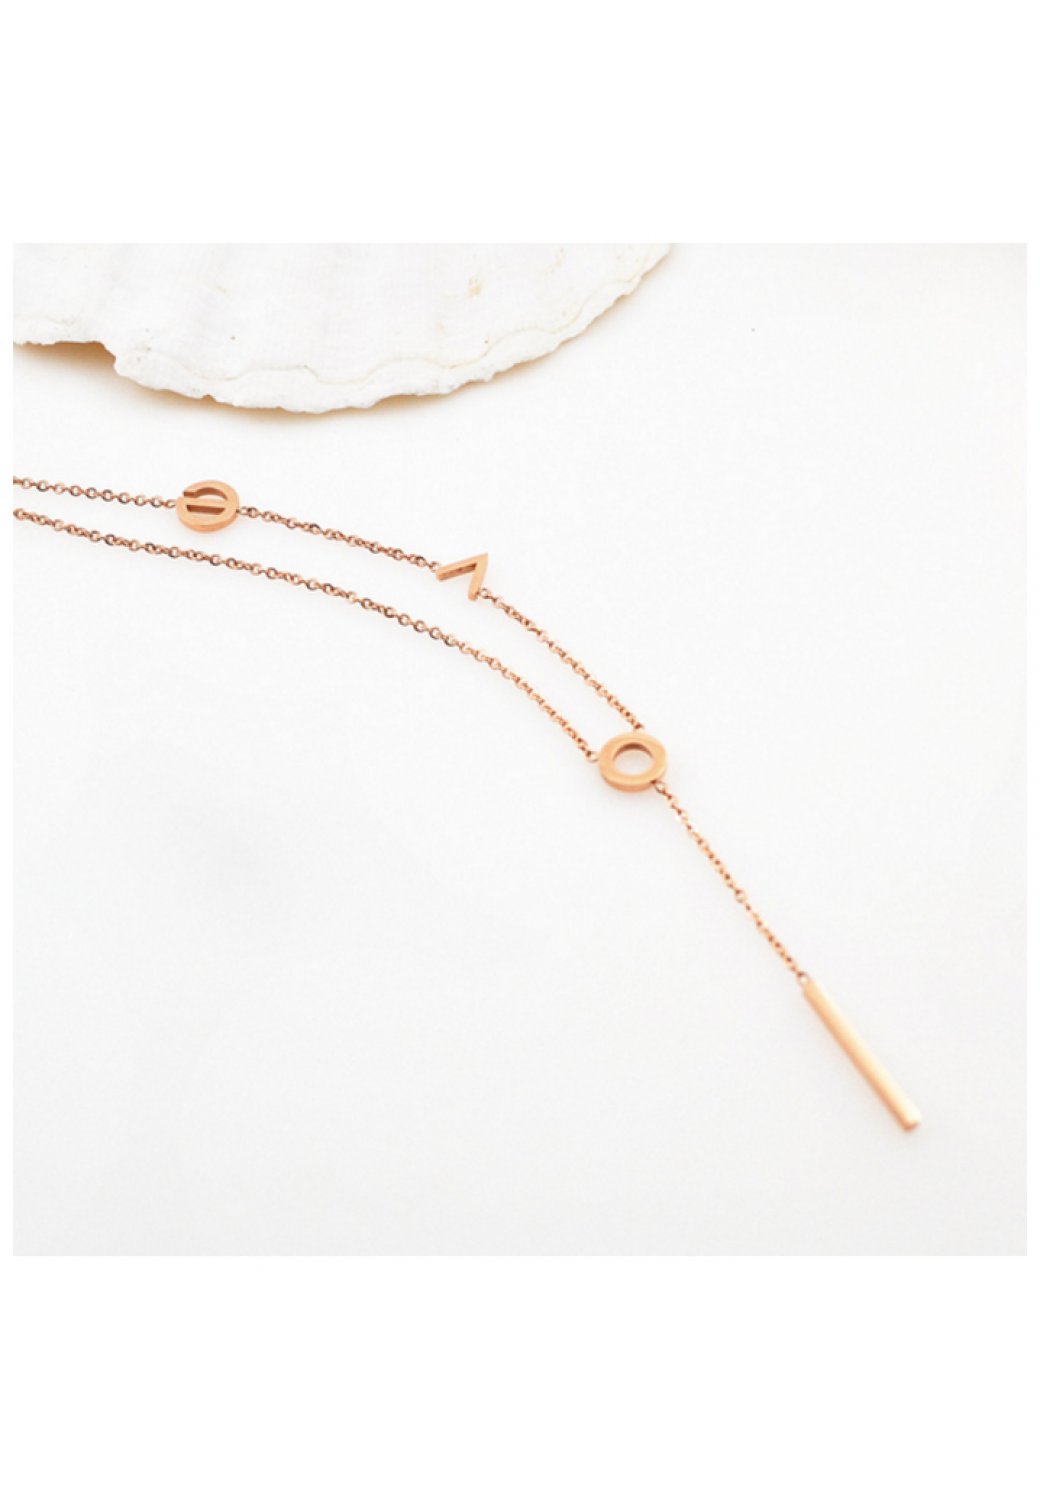 NECKLACE-14-ROSE GOLD